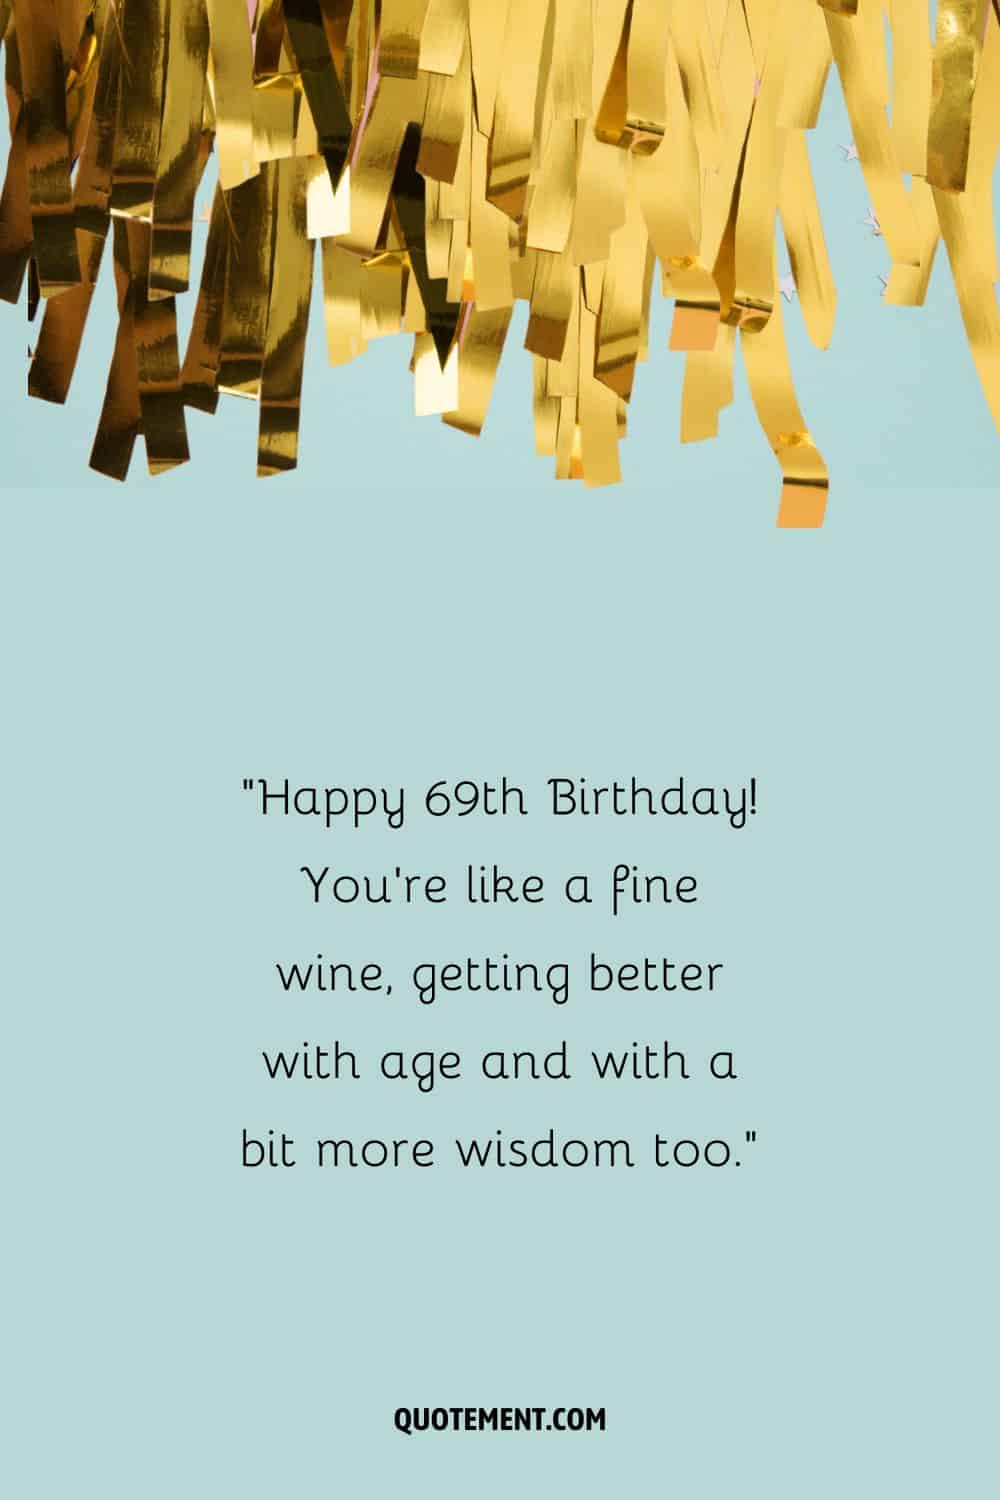 Happy 69th Birthday! You're like a fine wine, getting better with age and with a bit more wisdom too